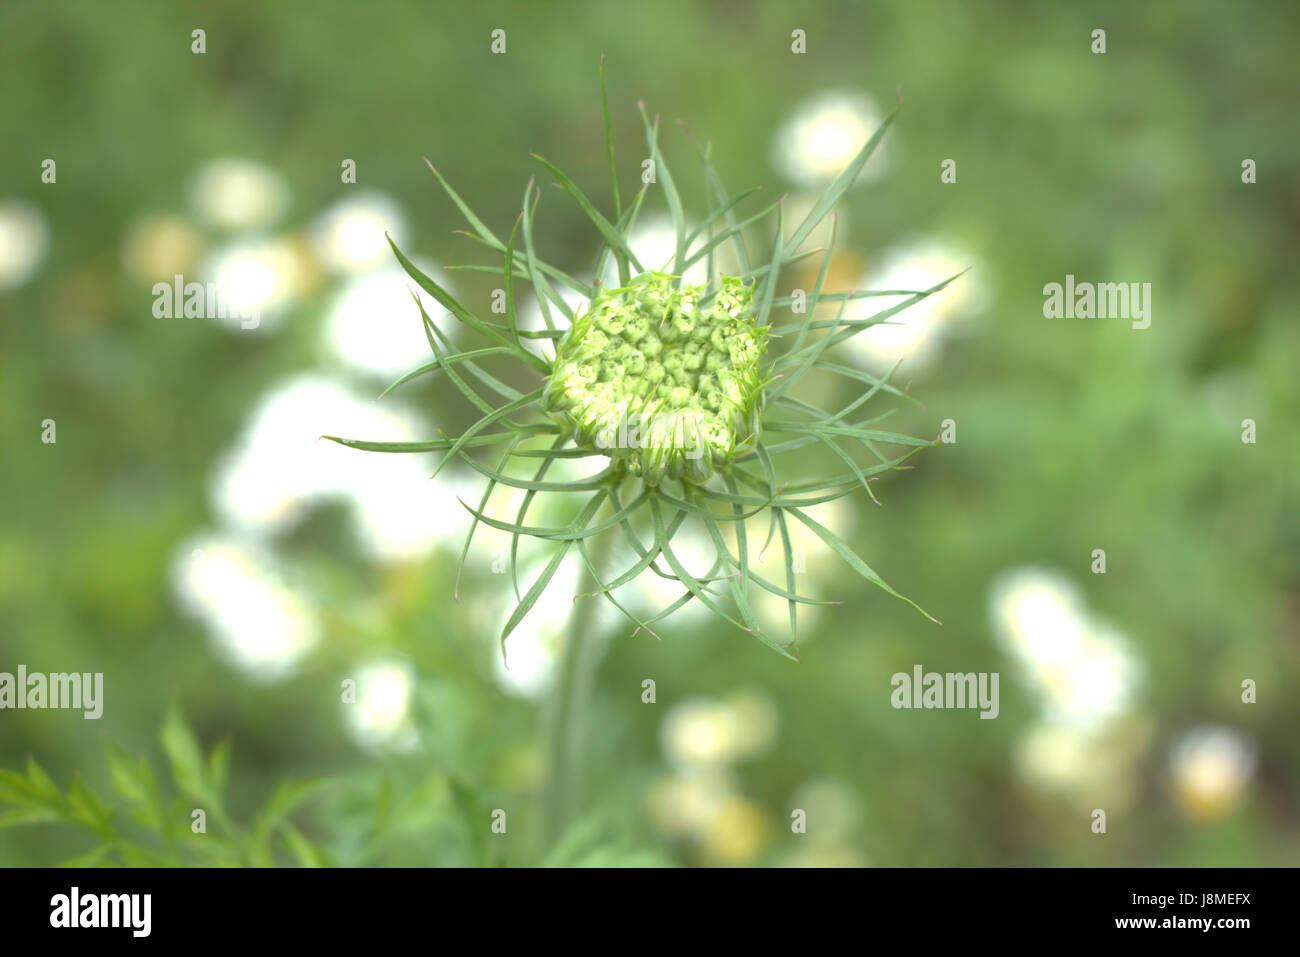 Wild Carrot Flower / Queen Anne's Lace Stock Photo - Alamy